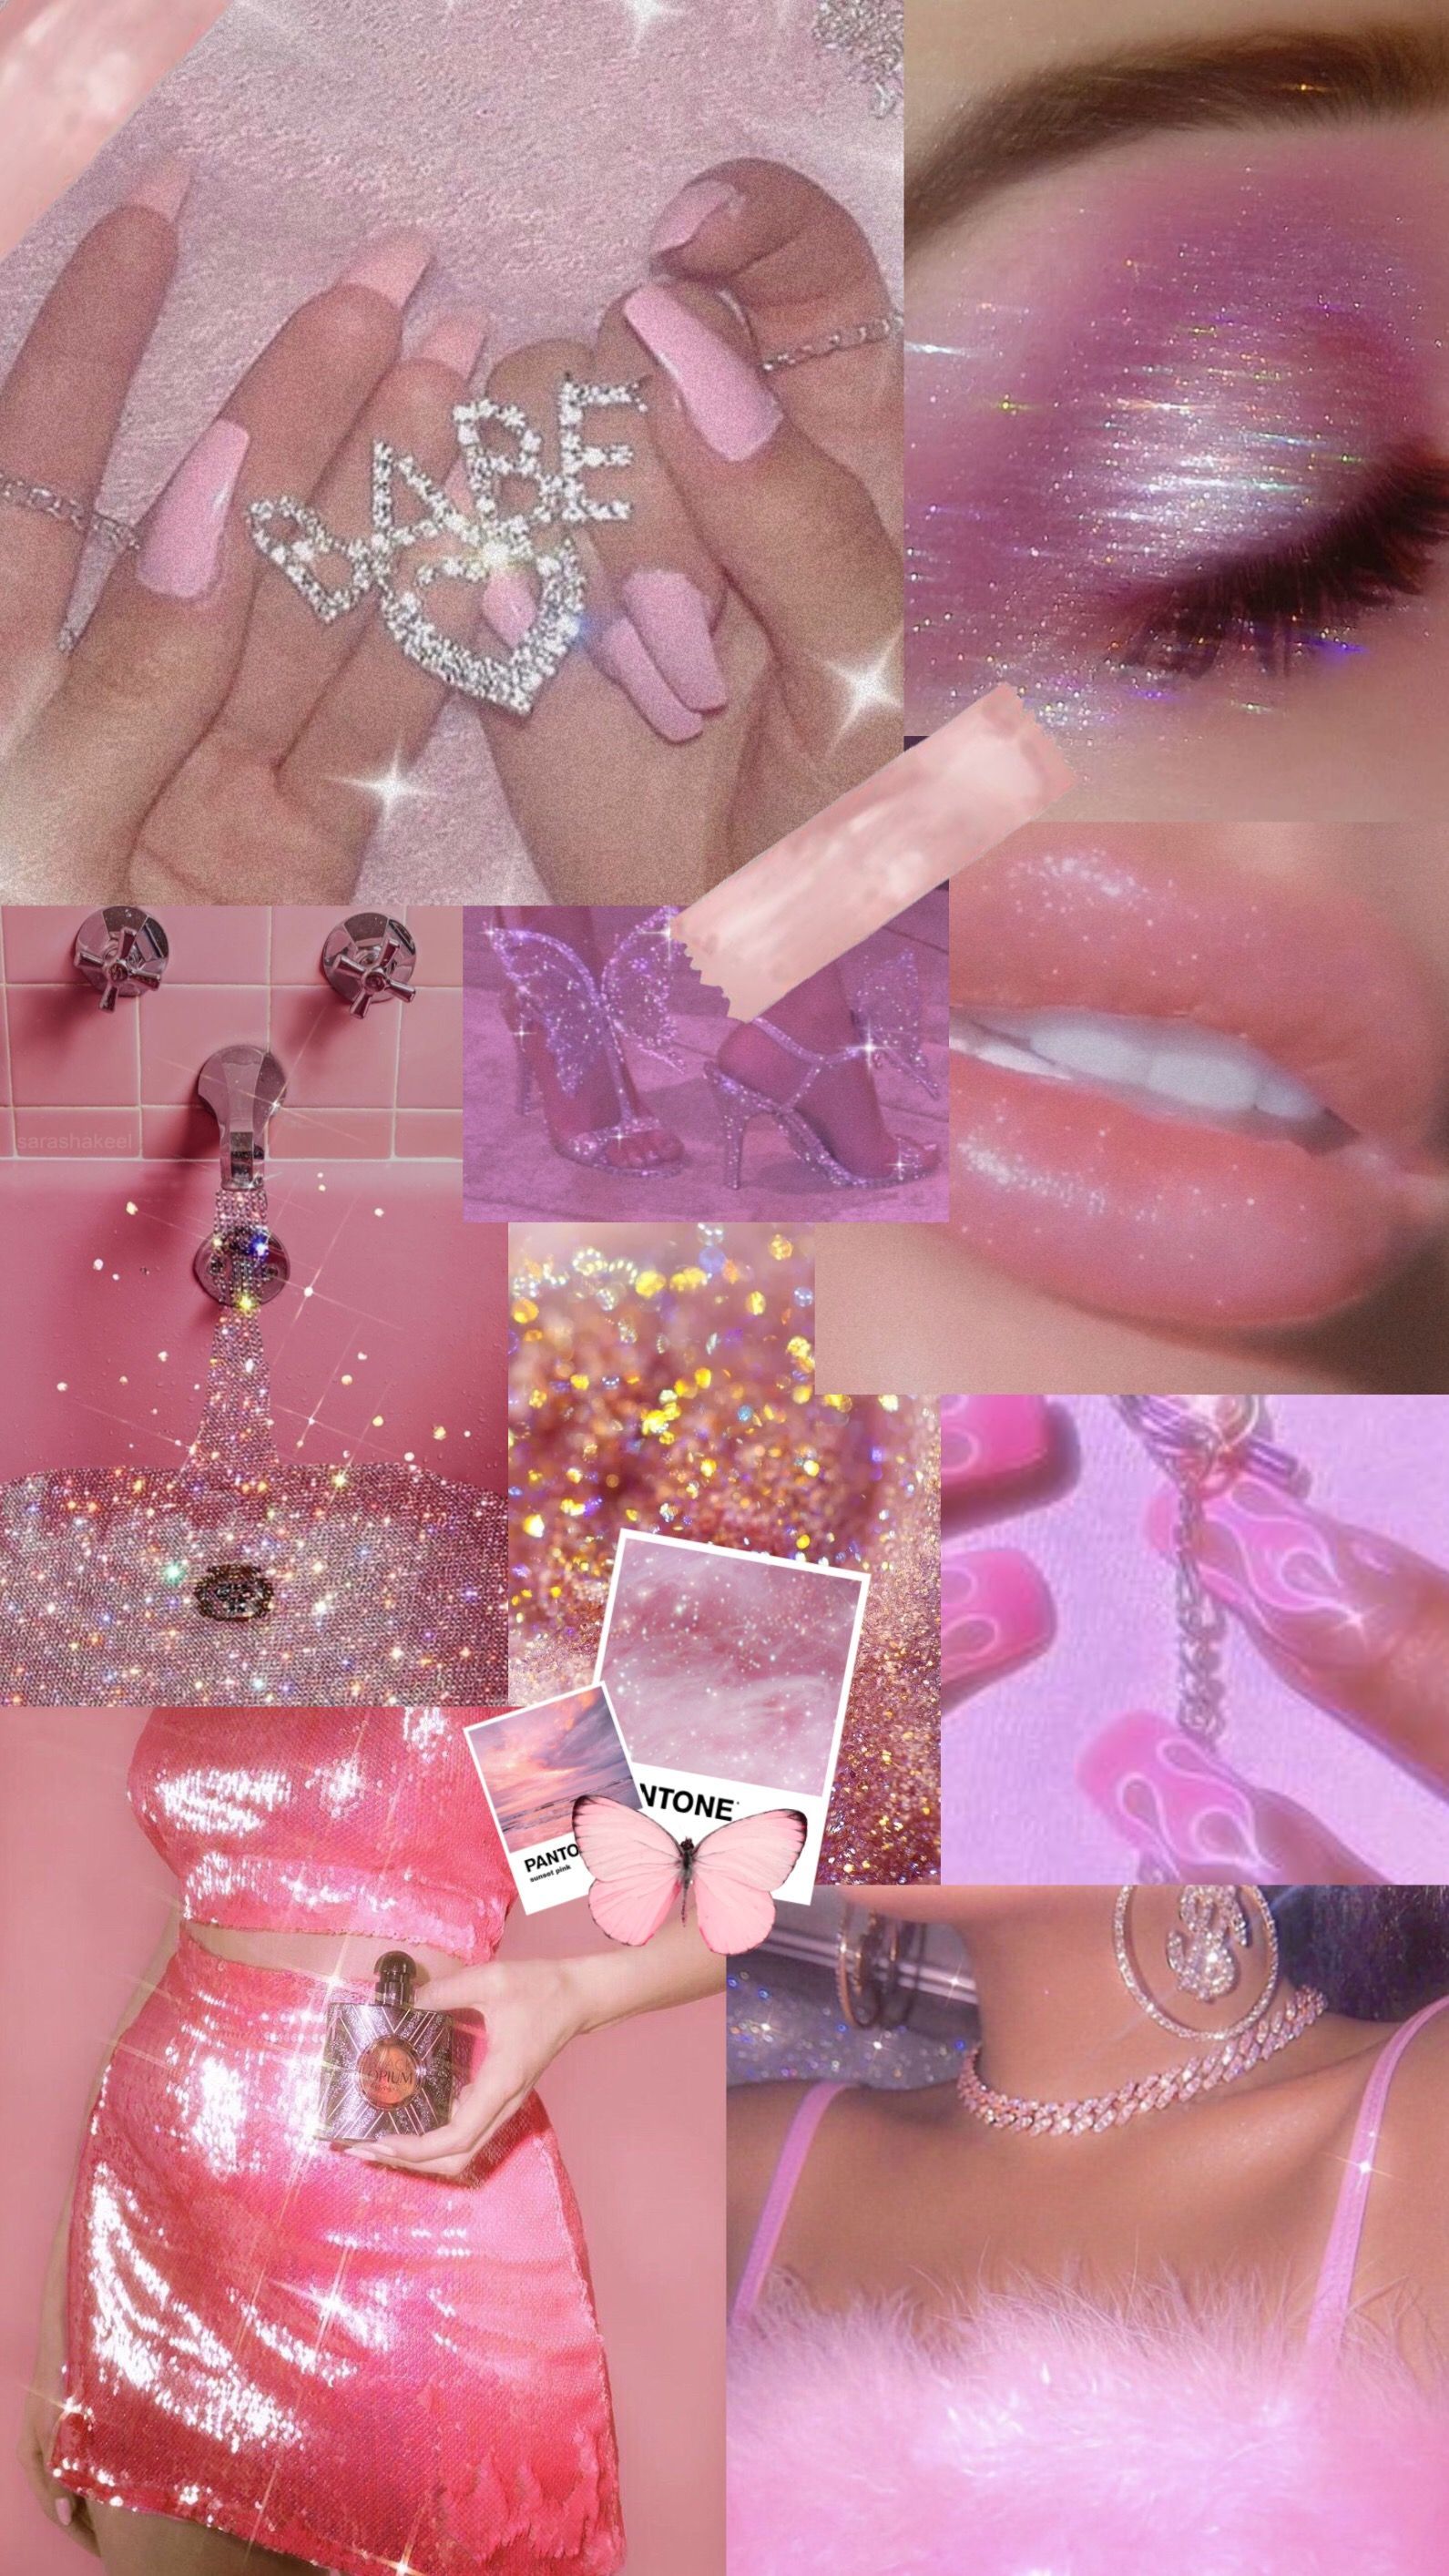 Aesthetic collage of pink makeup, nails, and accessories. - Nails